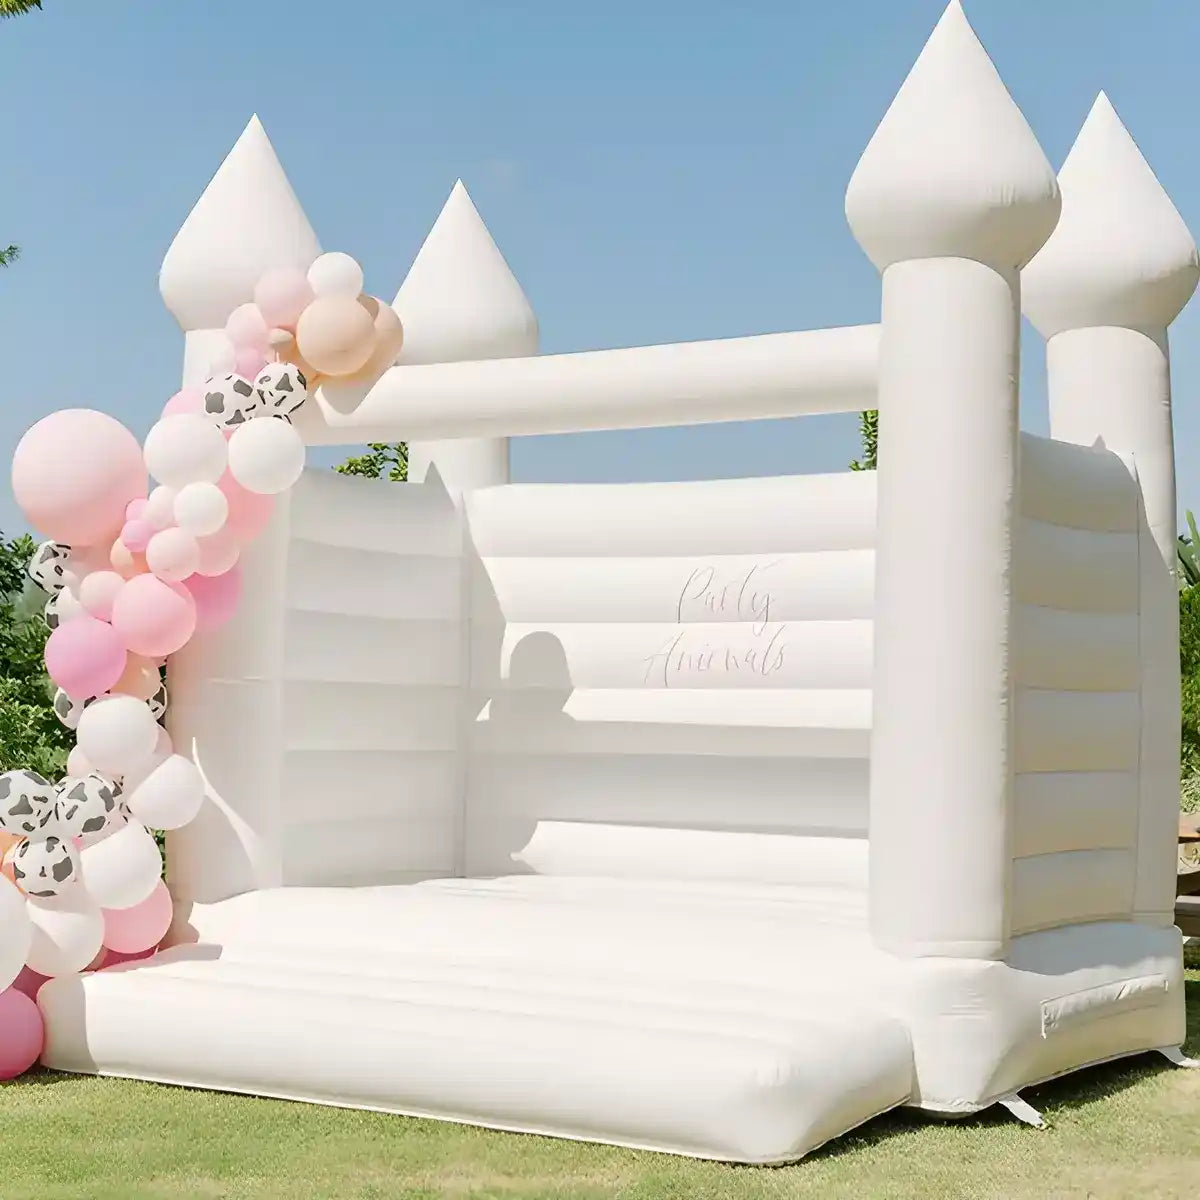 Walled bounce house decorated for backyard birthday party